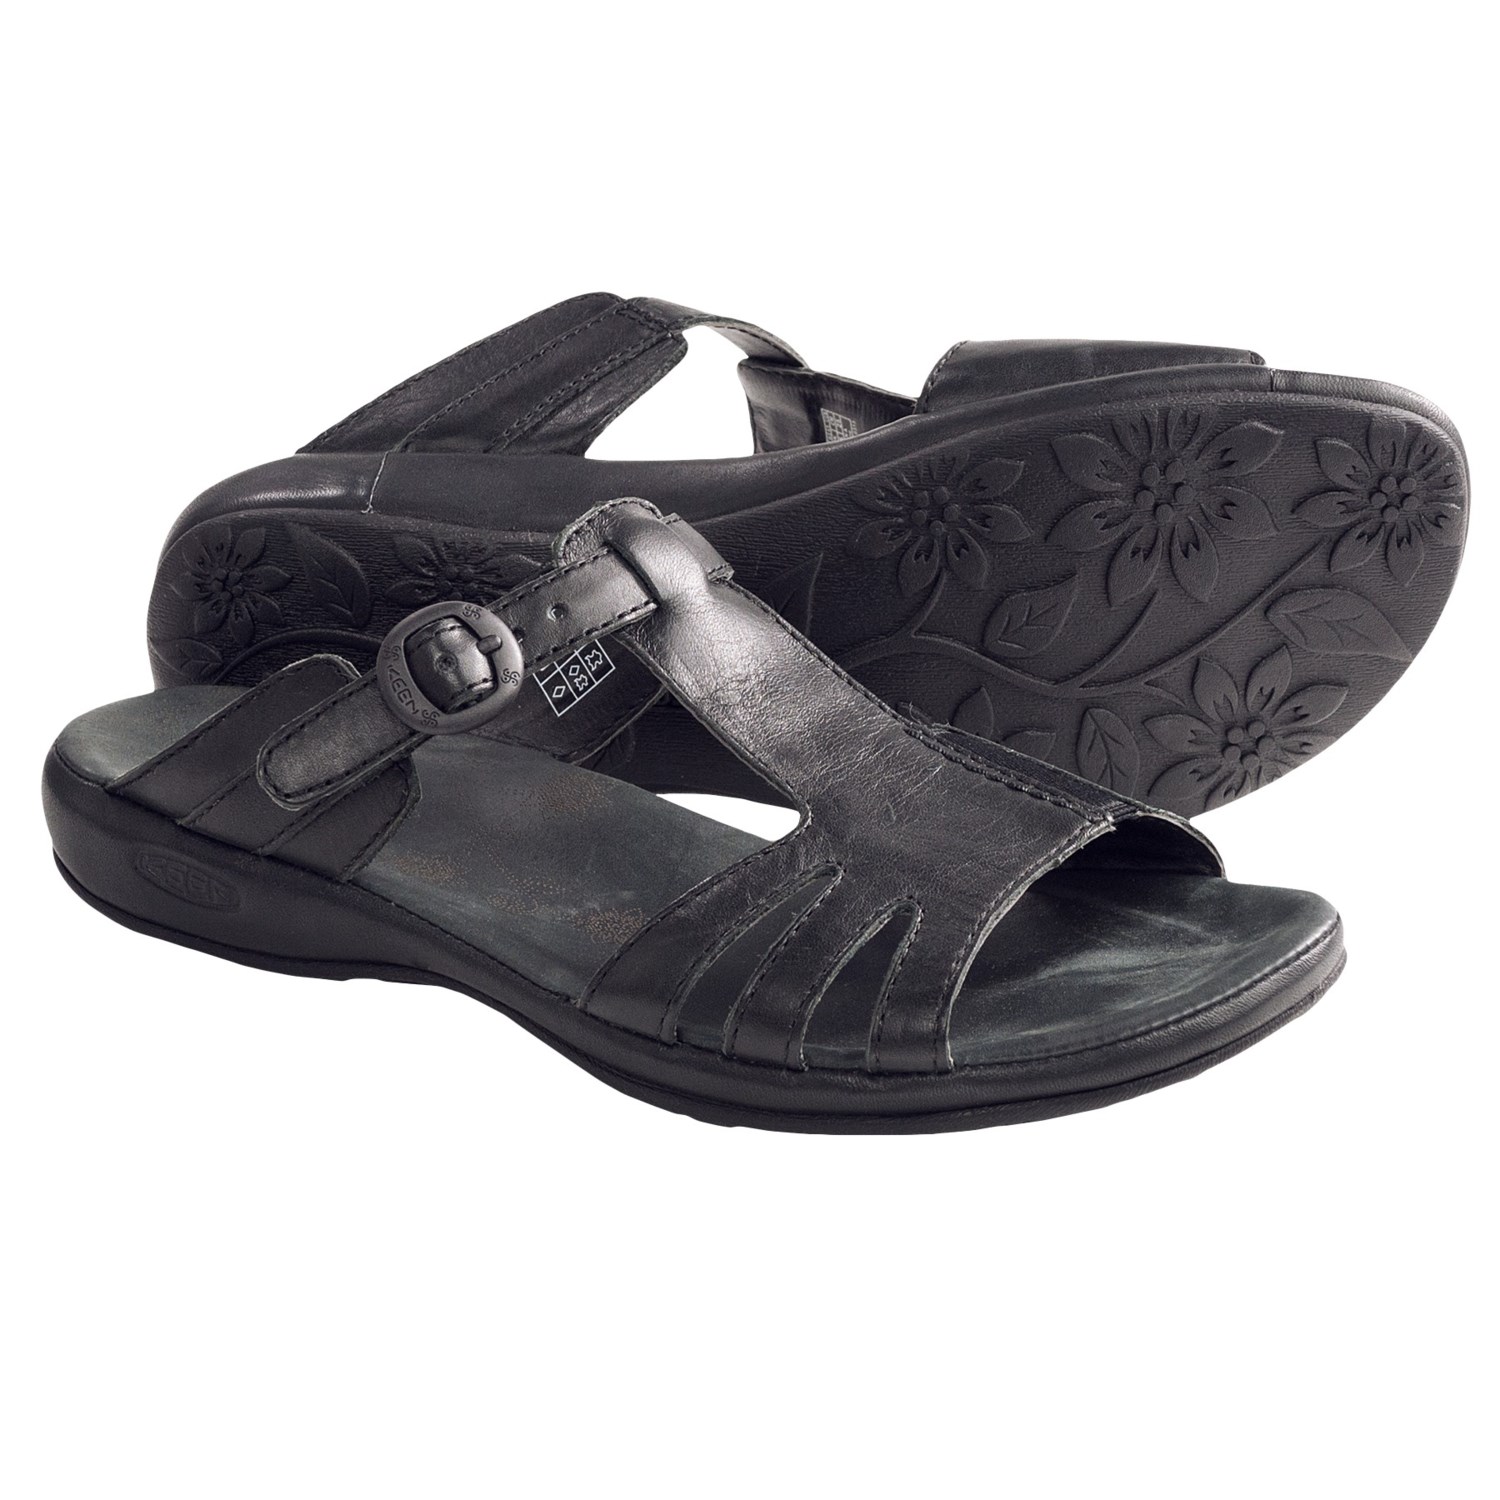 Keen Emerald City II Slide Sandals - Leather (For Women) - Save 71%